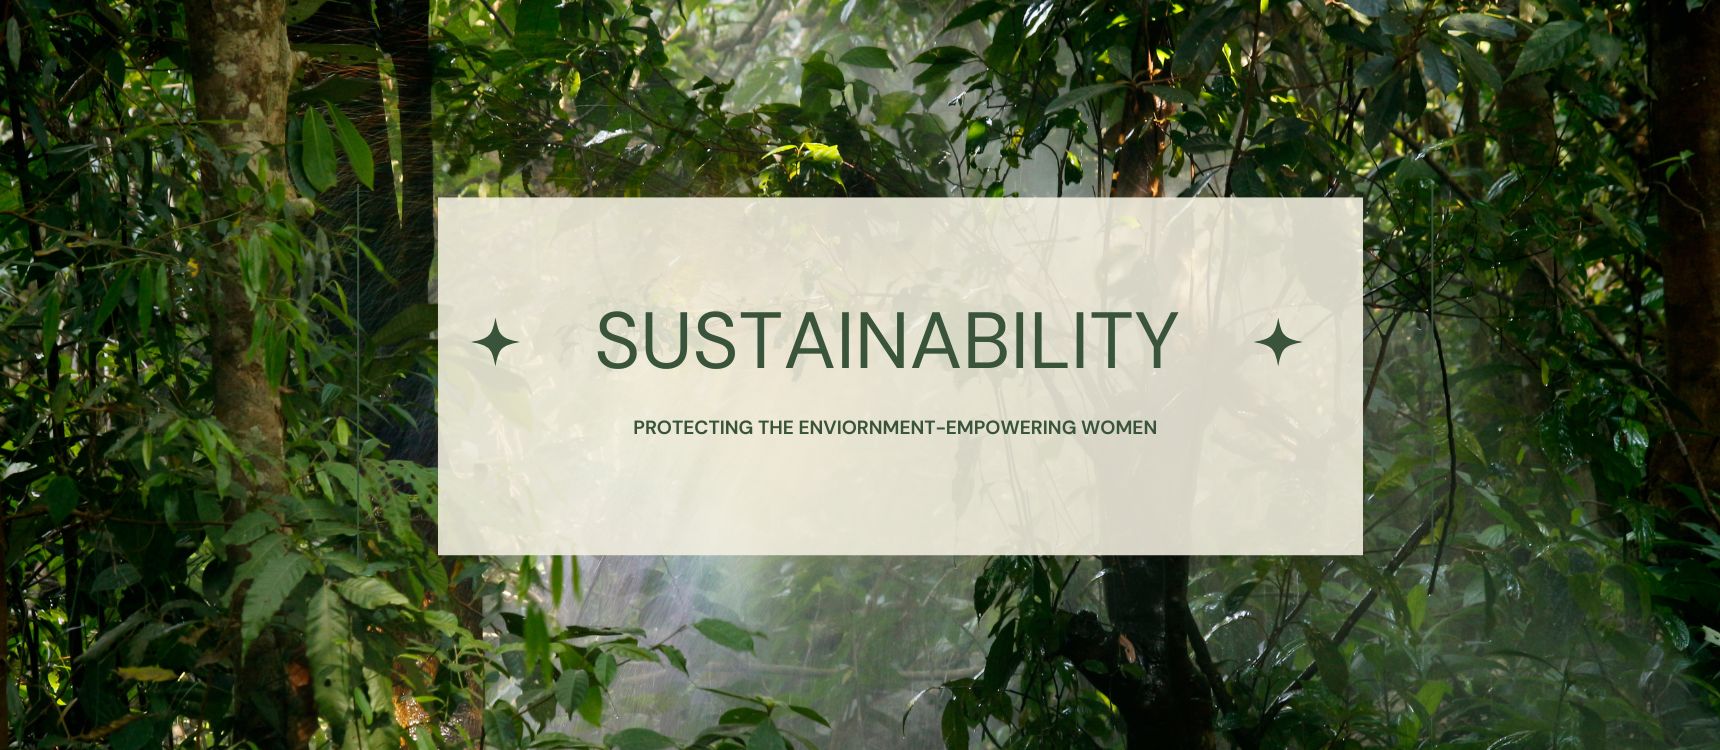 "Sustainability: bunko junko Building a Better Tomorrow through Responsible Practices"